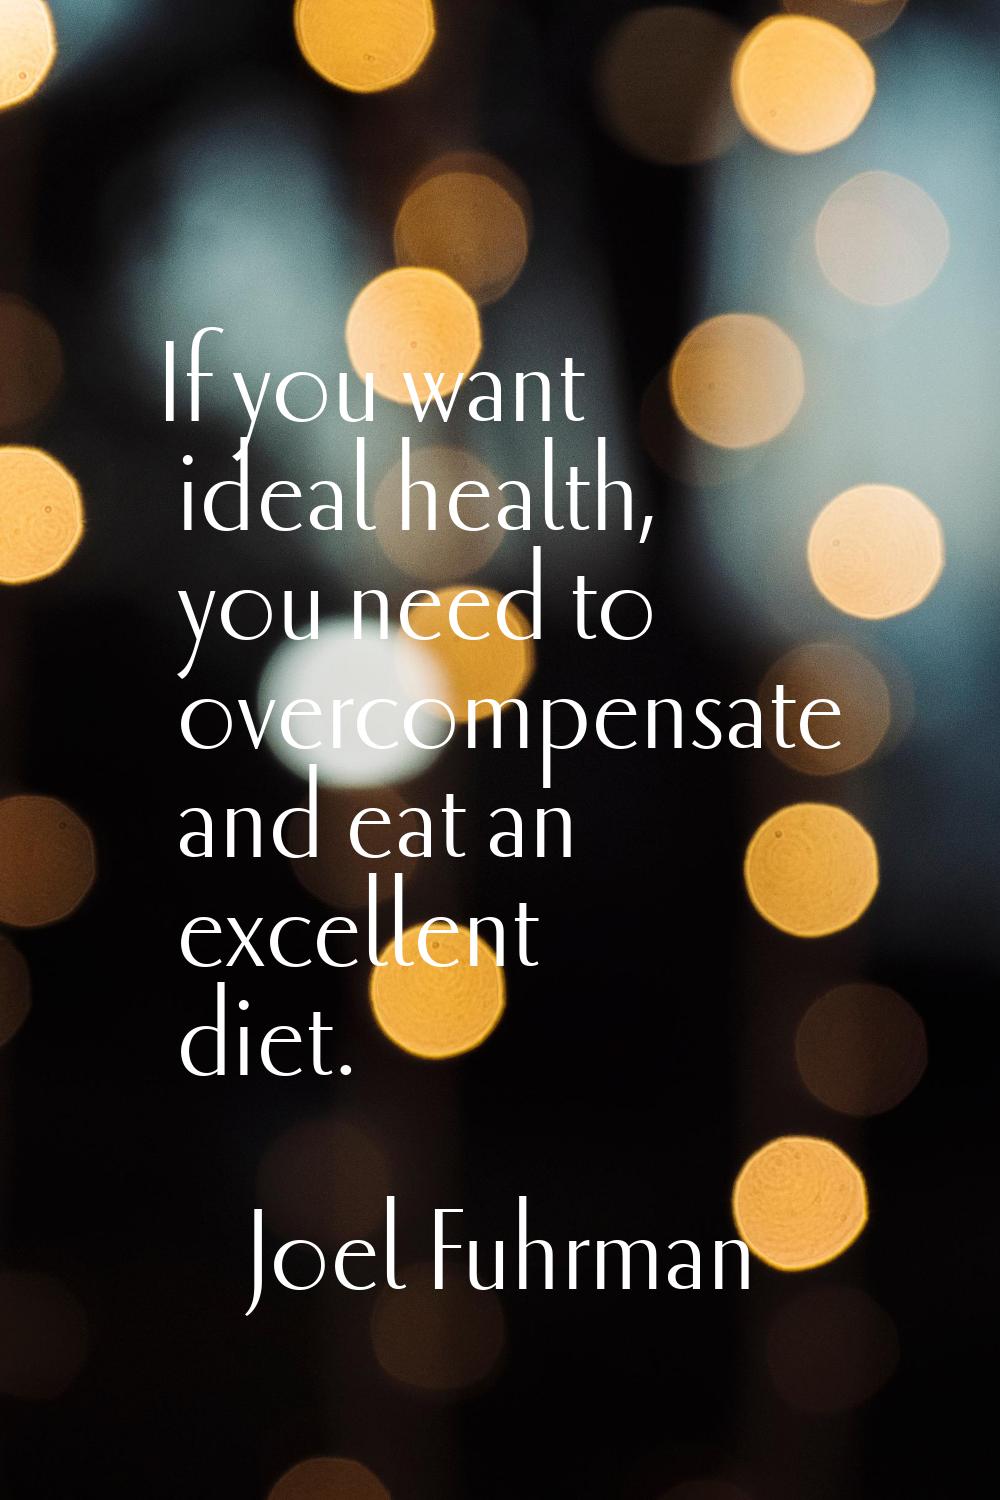 If you want ideal health, you need to overcompensate and eat an excellent diet.